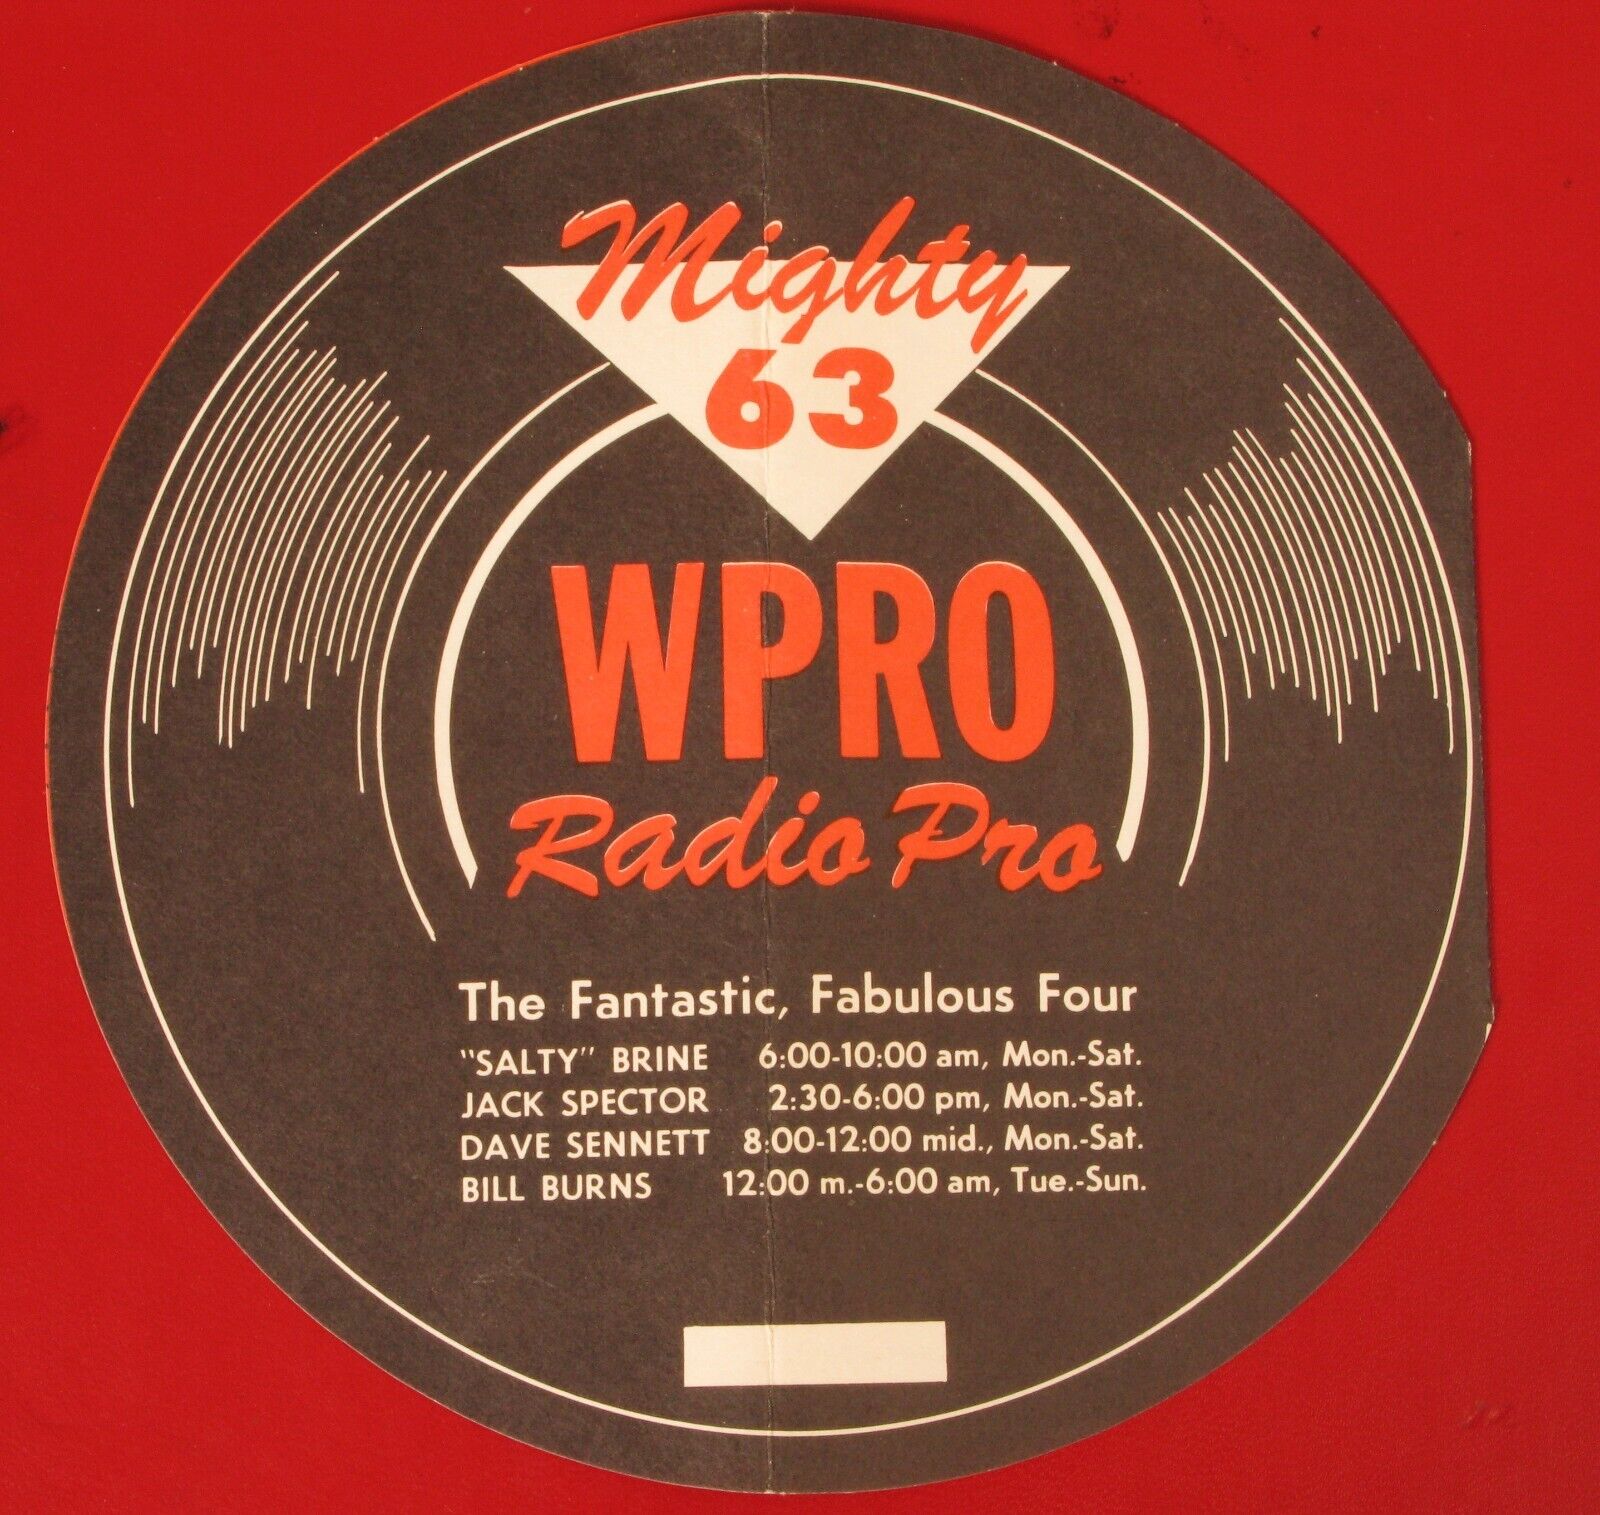 1959 PAPER RECORD LP WPRO DIAL 63 MUSIC GUIDE RADIO STATION SALTY BRINE RARE 